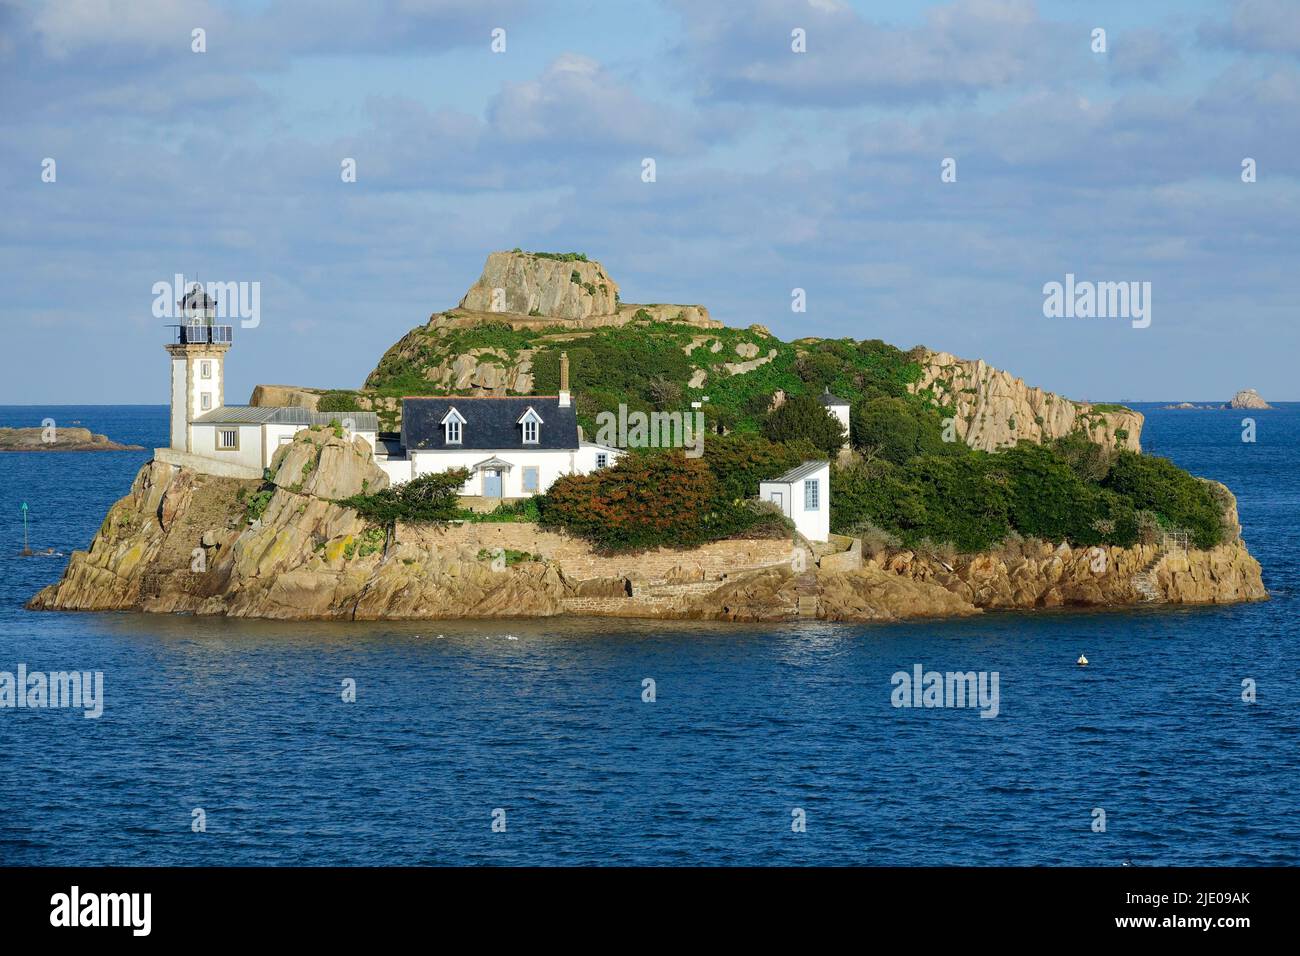 View from the Pointe de Penn al Lann in Carantec to the island Ile Louet with lighthouse at the entrance to the bay of Morlaix, department Finistere Stock Photo